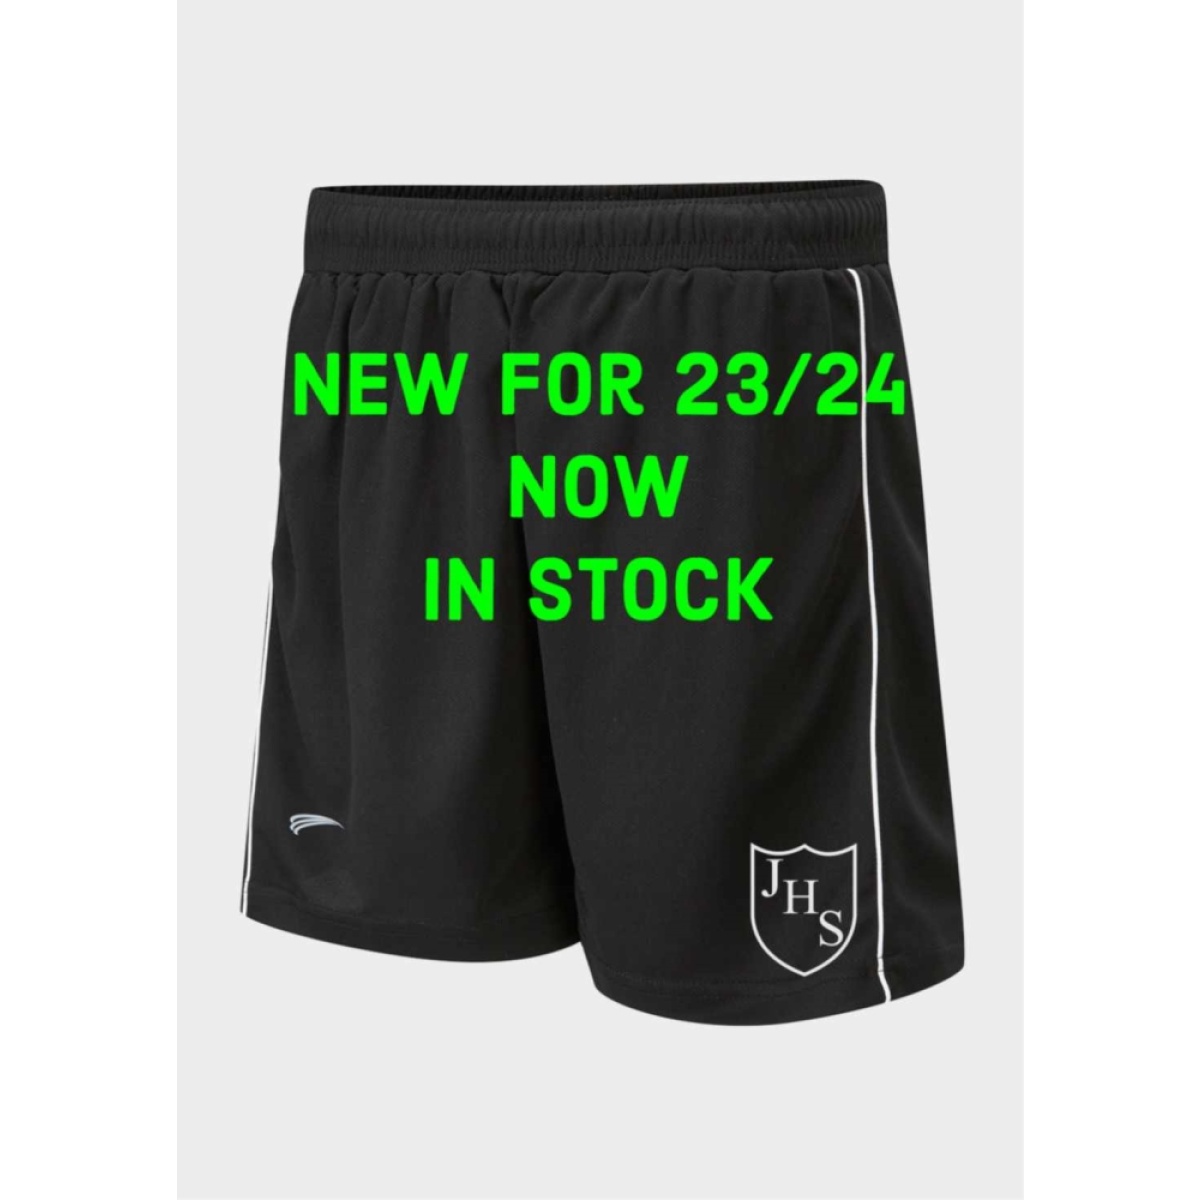 James Hornsby School - 2023/24 NEW PE SHORTS, James Hornsby School